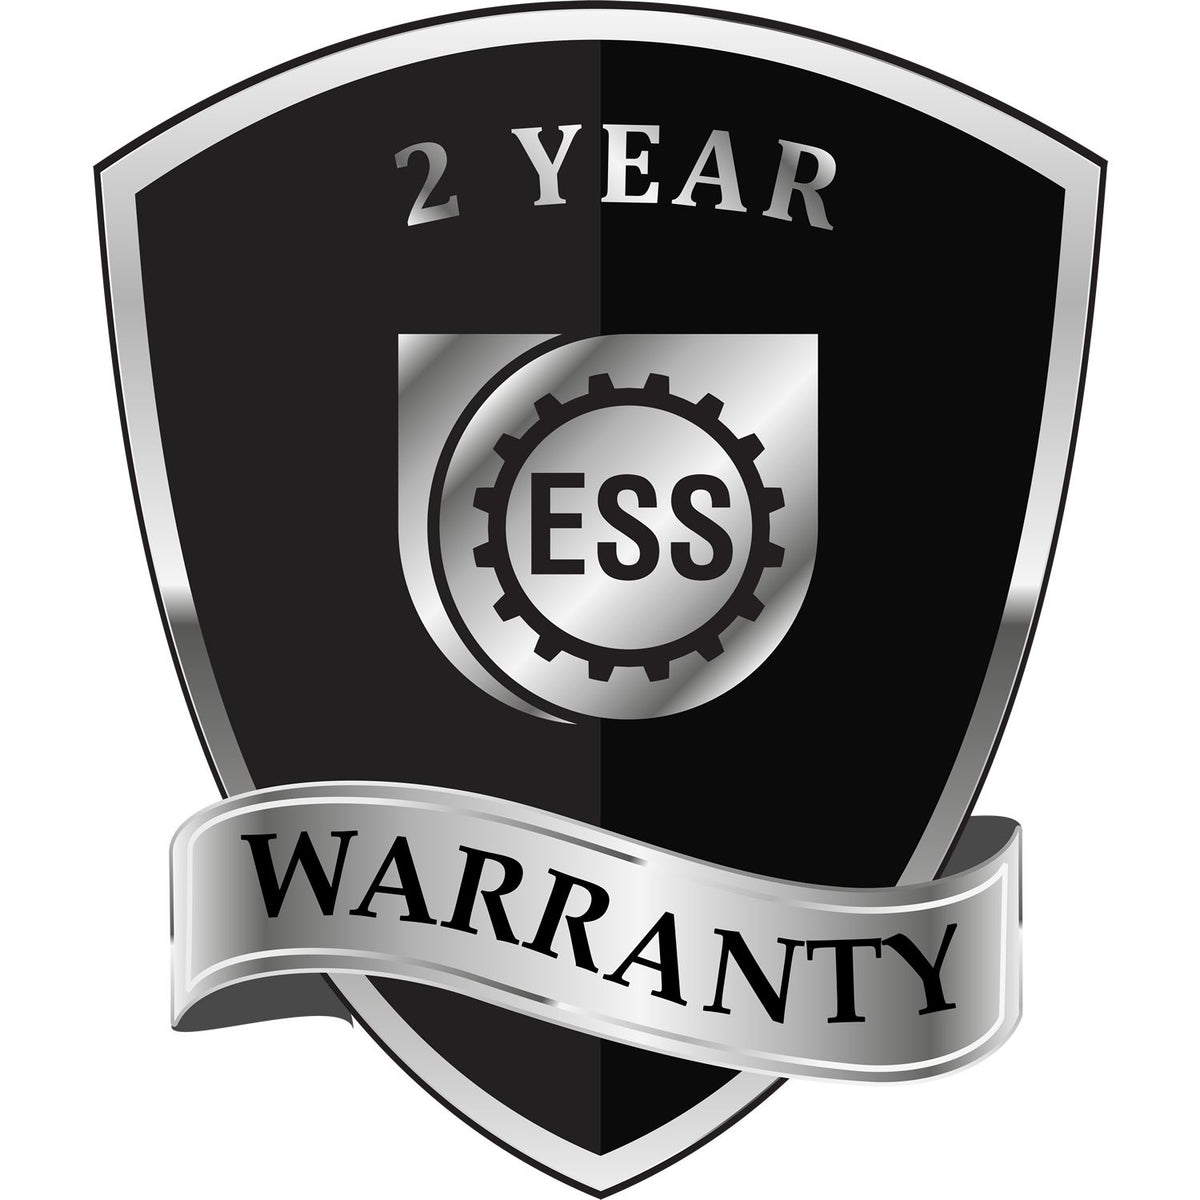 A black and silver badge or emblem showing warranty information for the Gift Delaware Engineer Seal